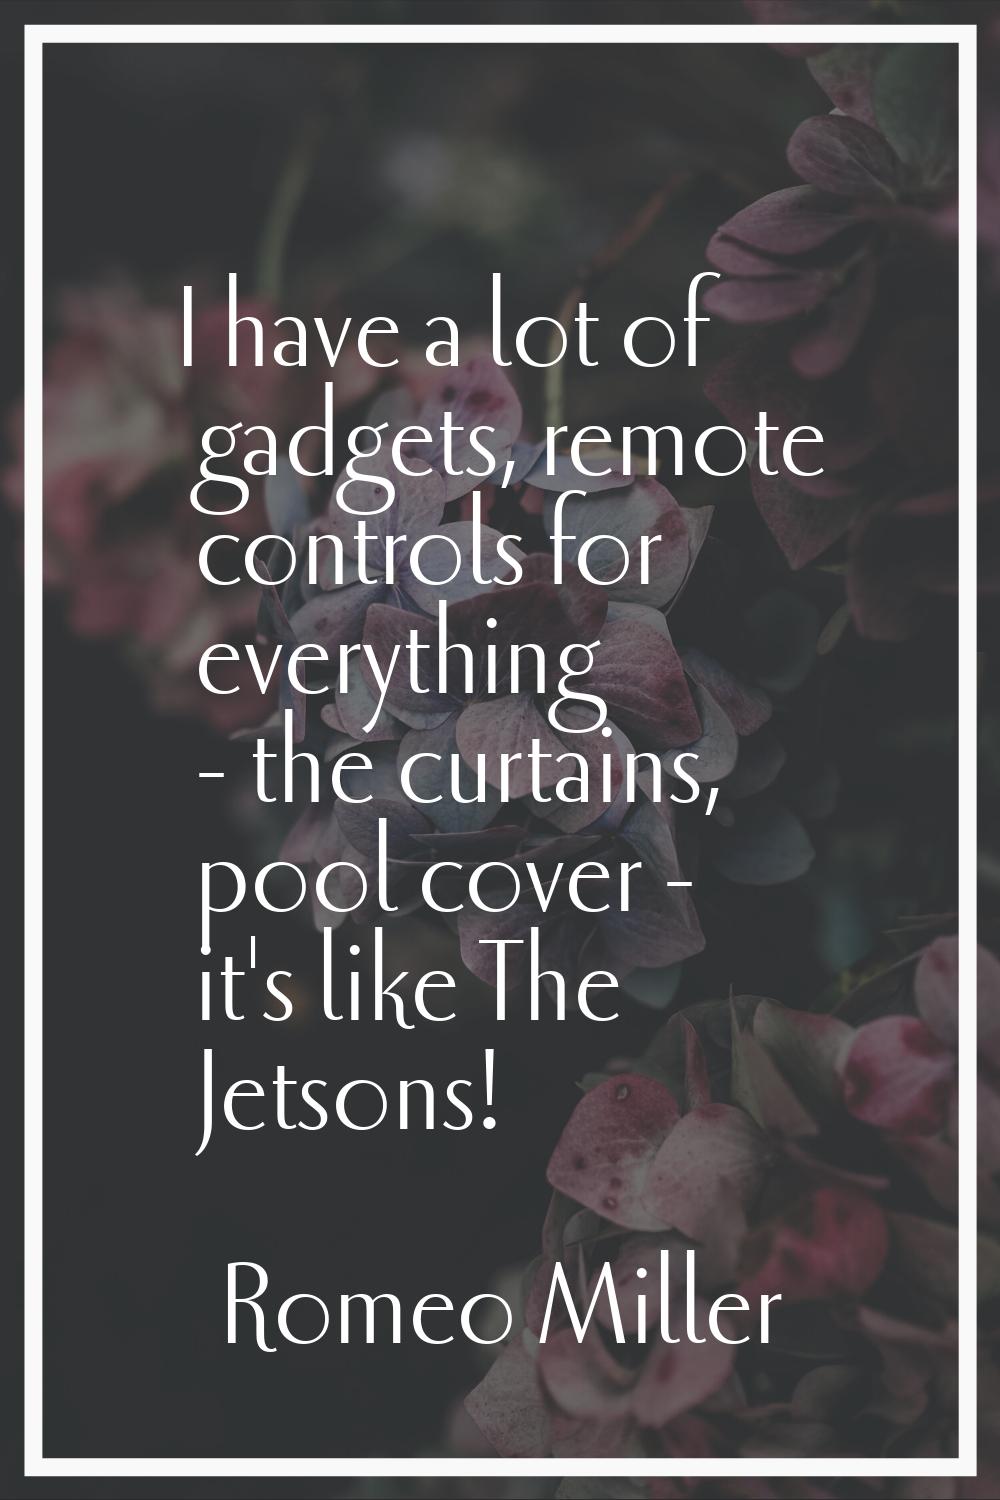 I have a lot of gadgets, remote controls for everything - the curtains, pool cover - it's like The 